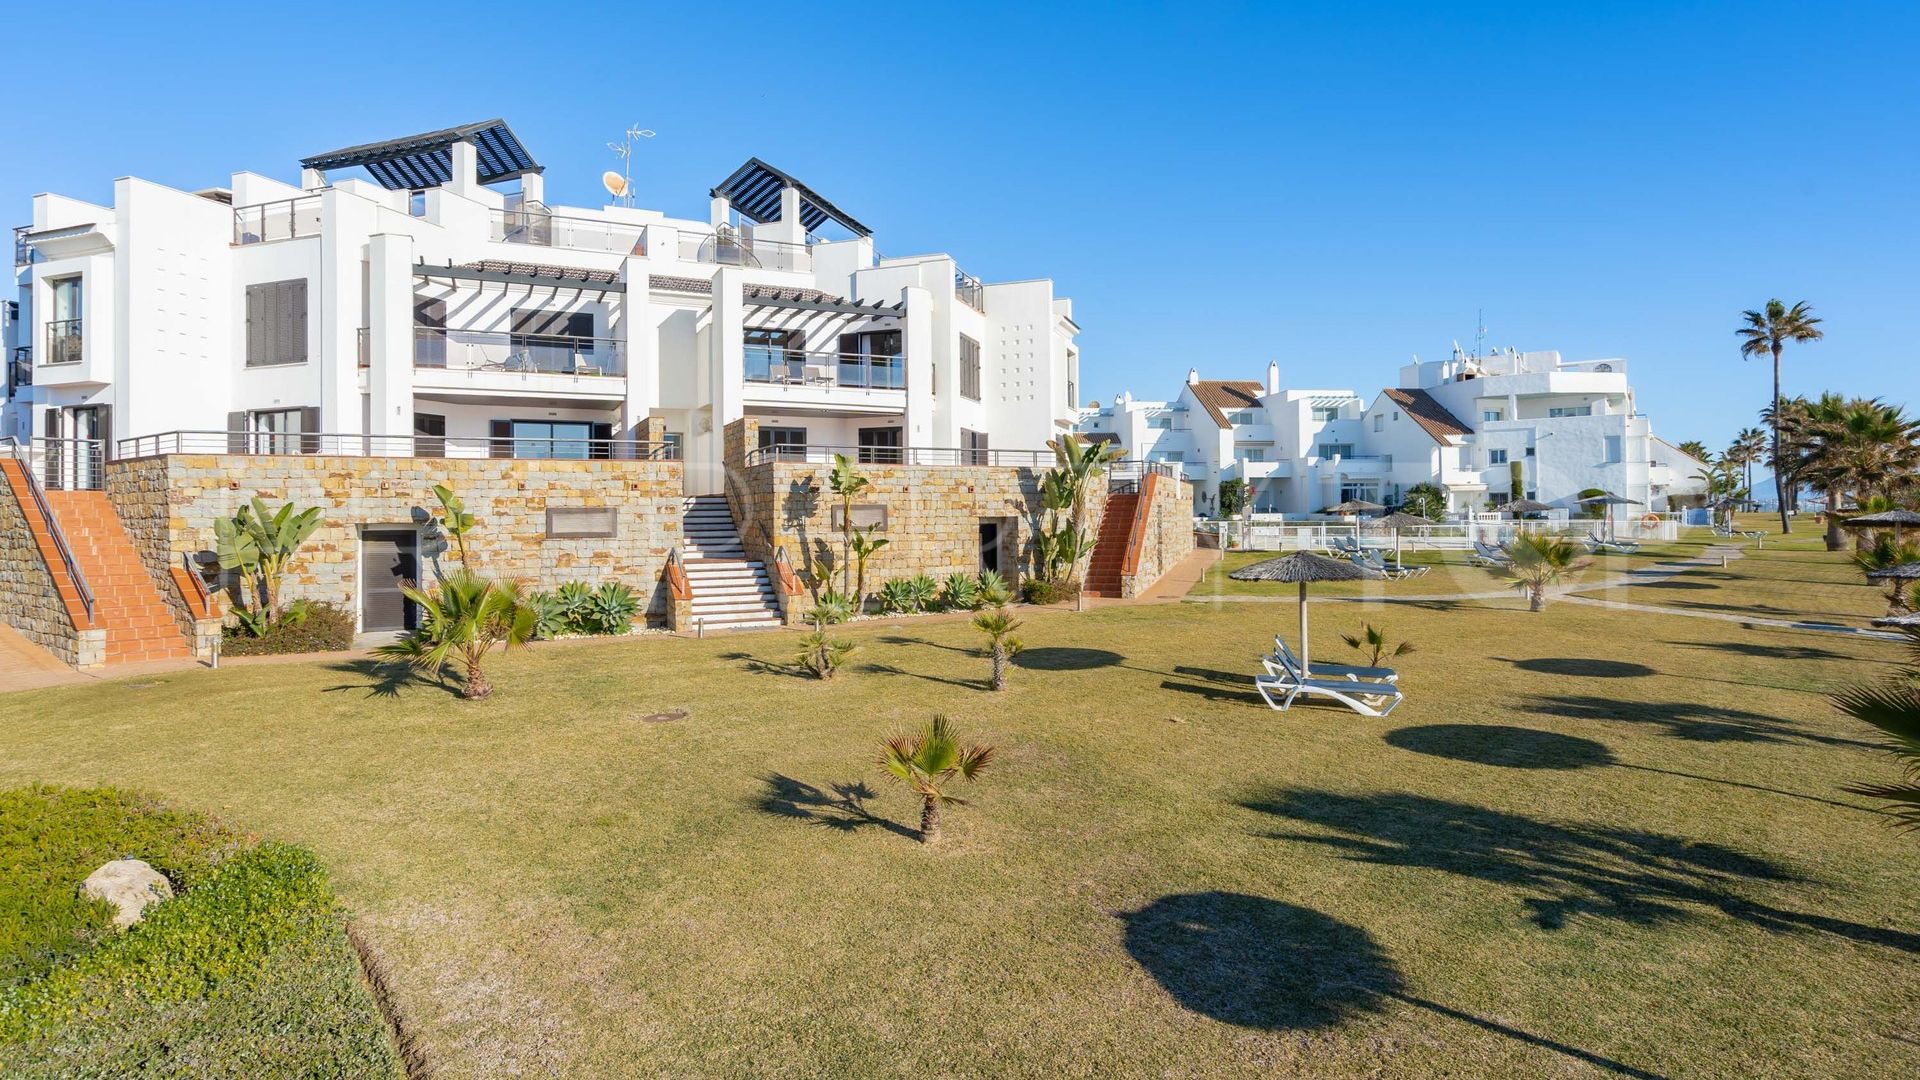 For sale penthouse in Casares del Mar with 2 bedrooms